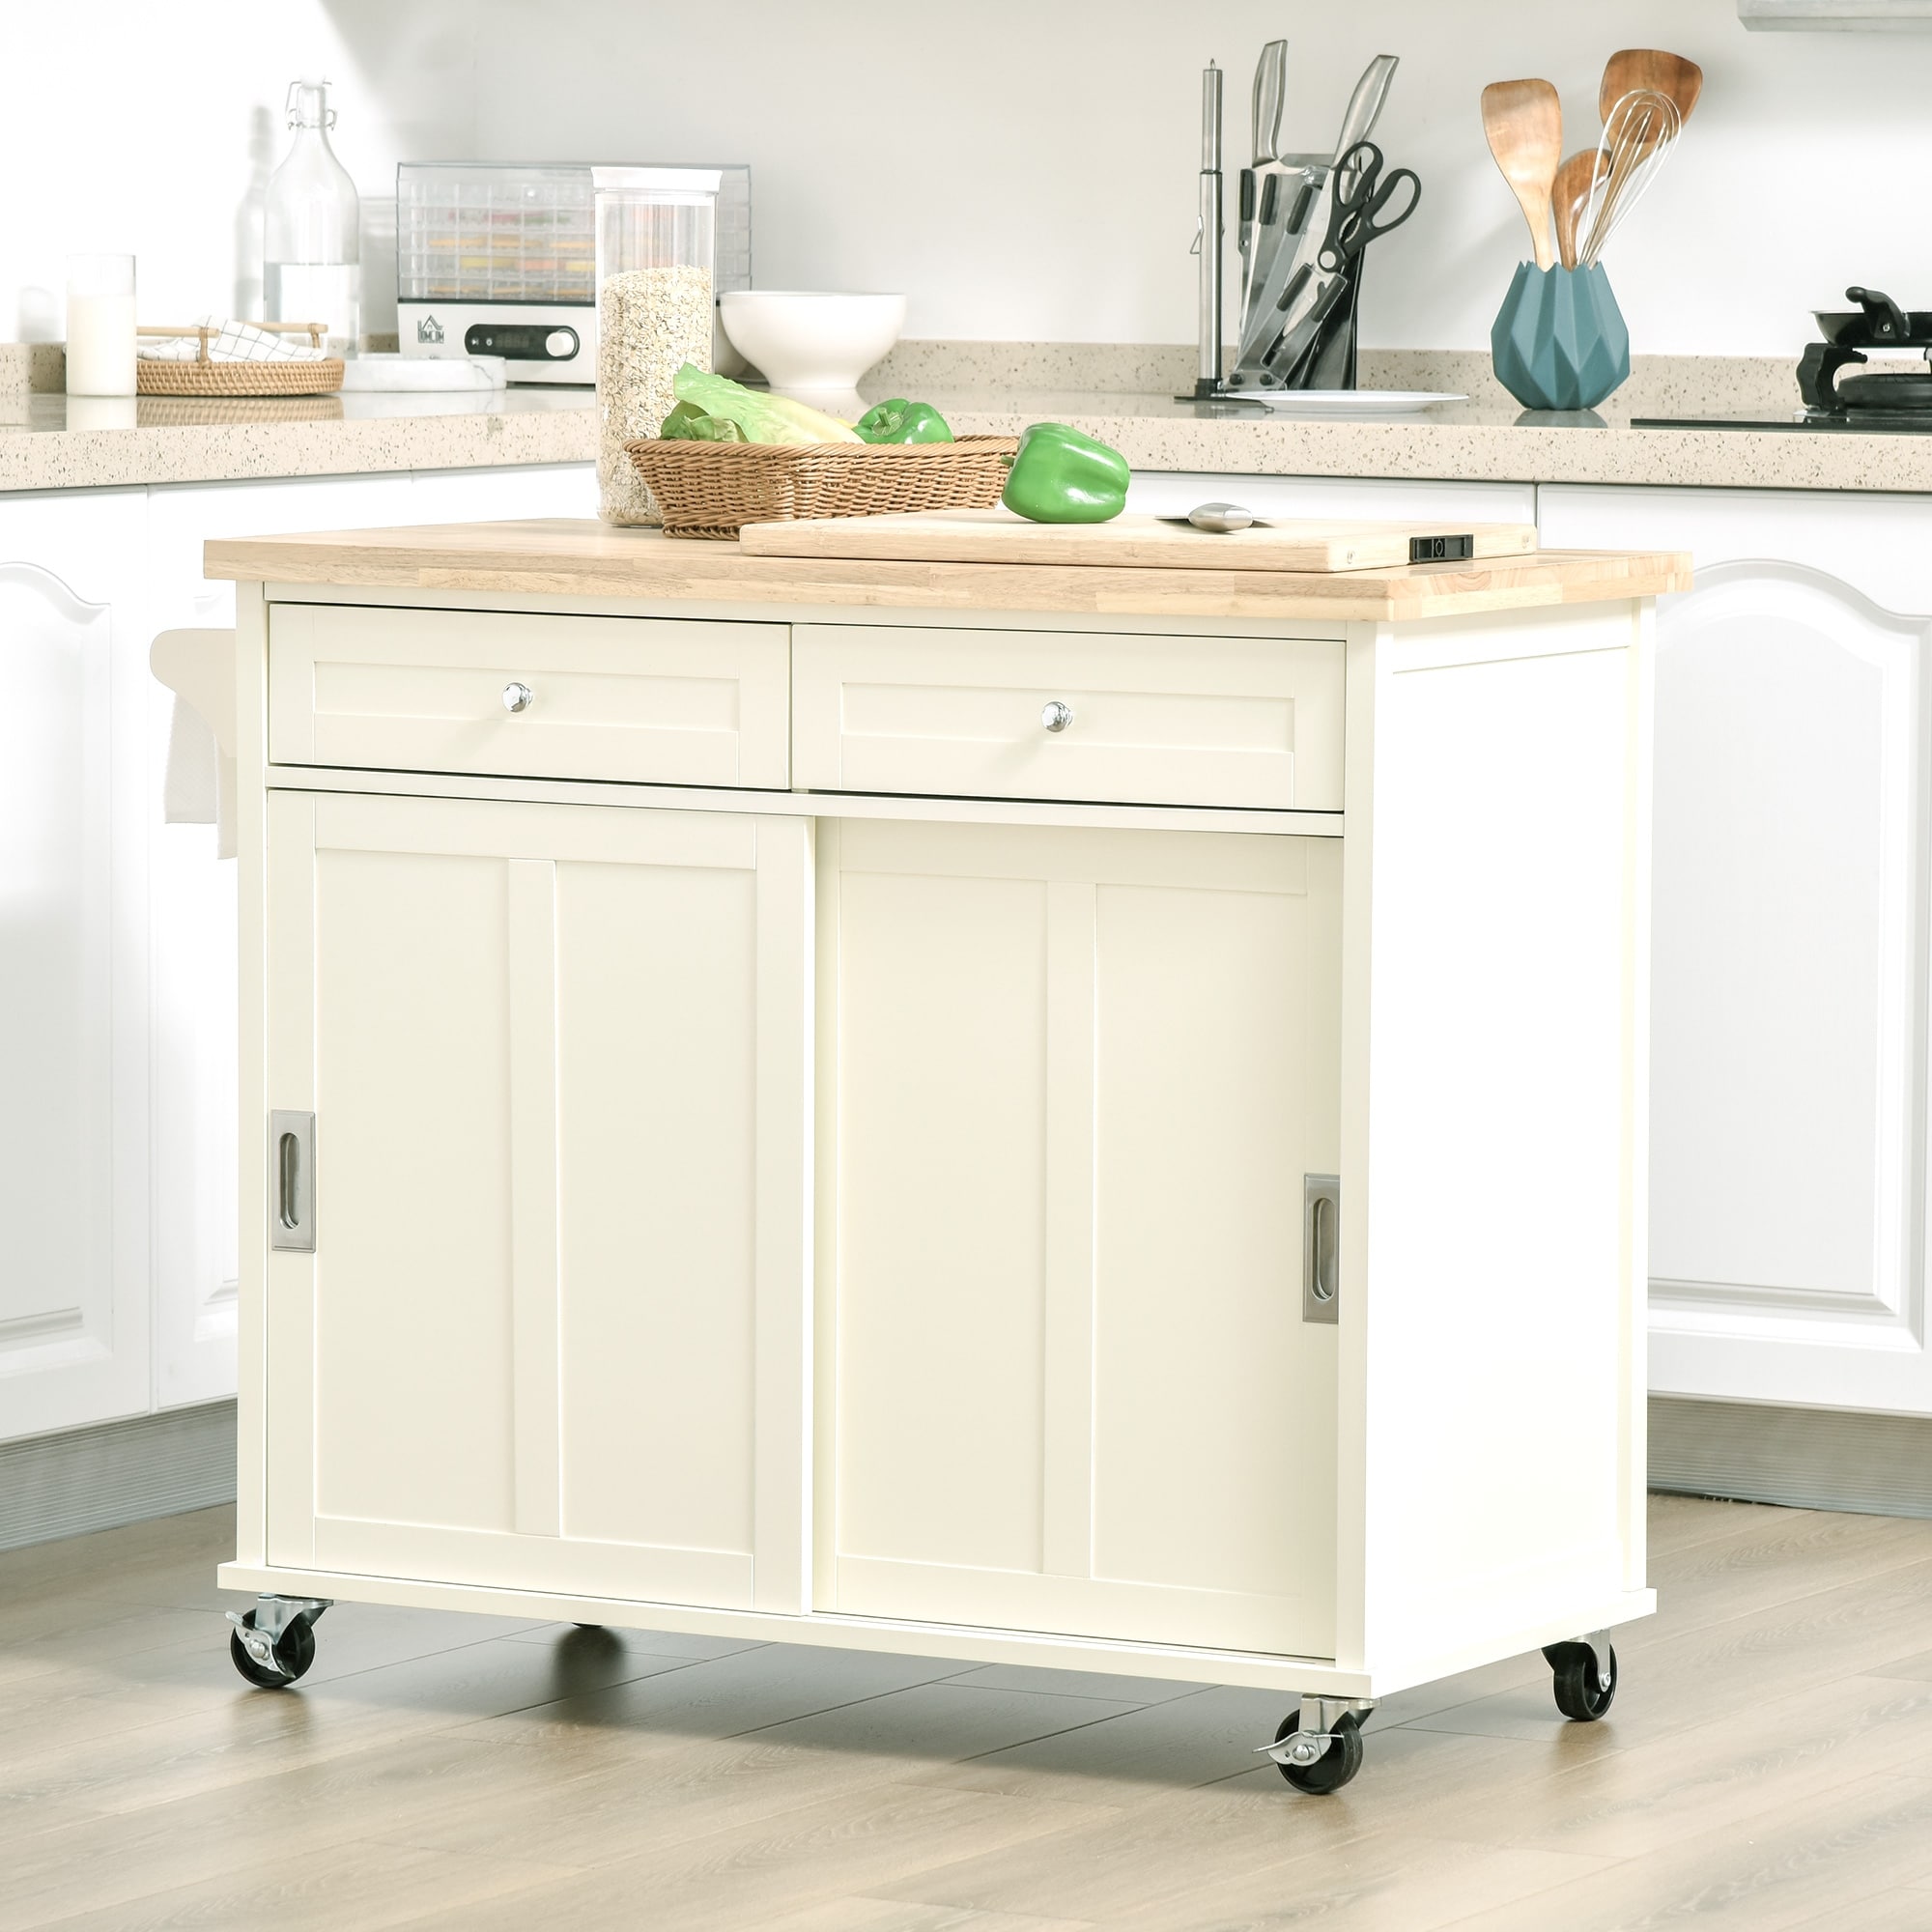 https://ak1.ostkcdn.com/images/products/is/images/direct/acde0795ac565dd6d8e71c72bf5b880105d8c0eb/HOMCOM-Rolling-Kitchen-Island-Utility-Trolley-Storage-Cart-with-Sliding-Door-Cabinet%2C-Rubberwood-Top%2C-2-Drawers%2C-White.jpg